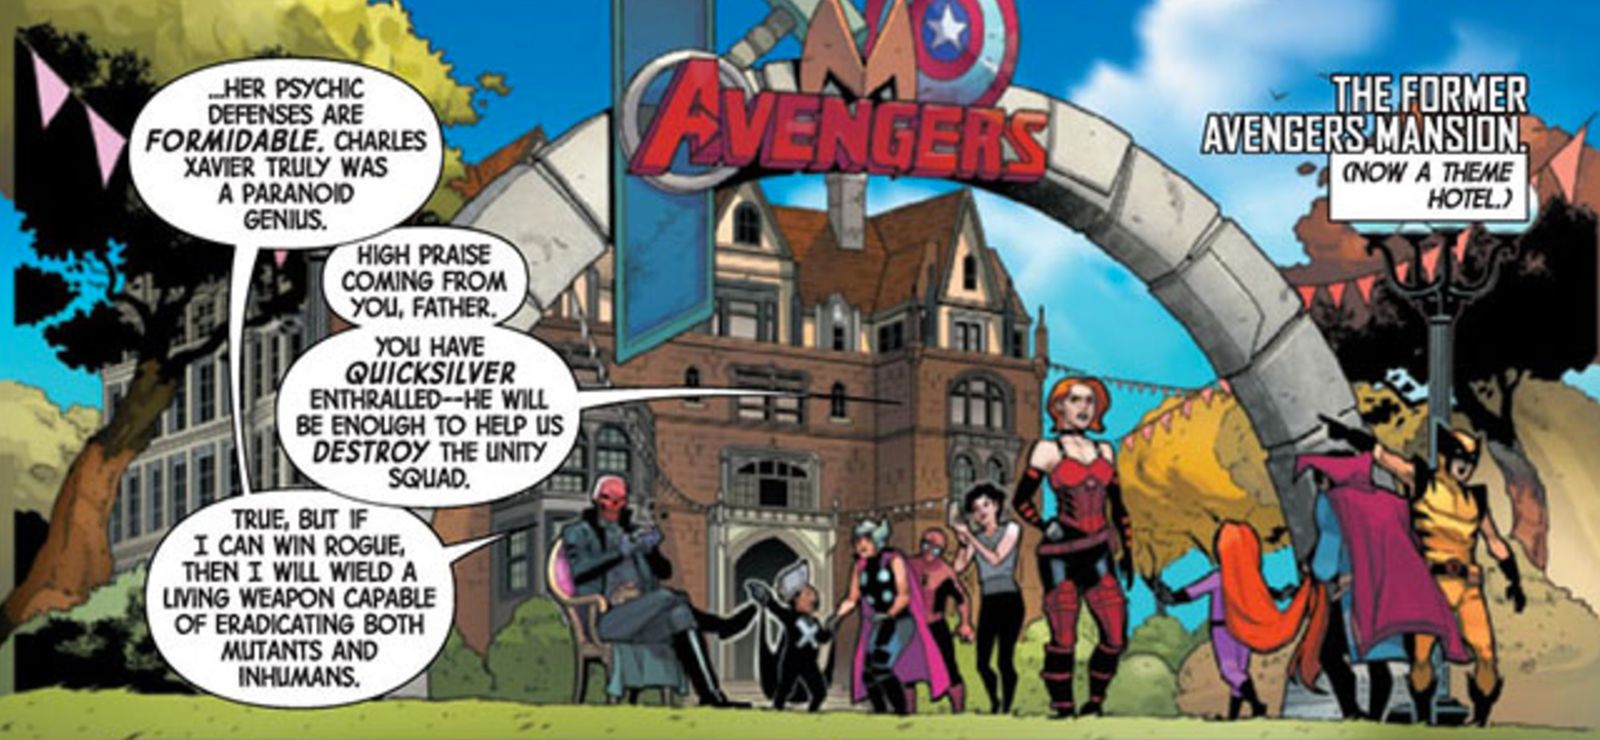 Avengers Mansion Was Converted Into A Theme Hotel In Uncanny Avengers 18